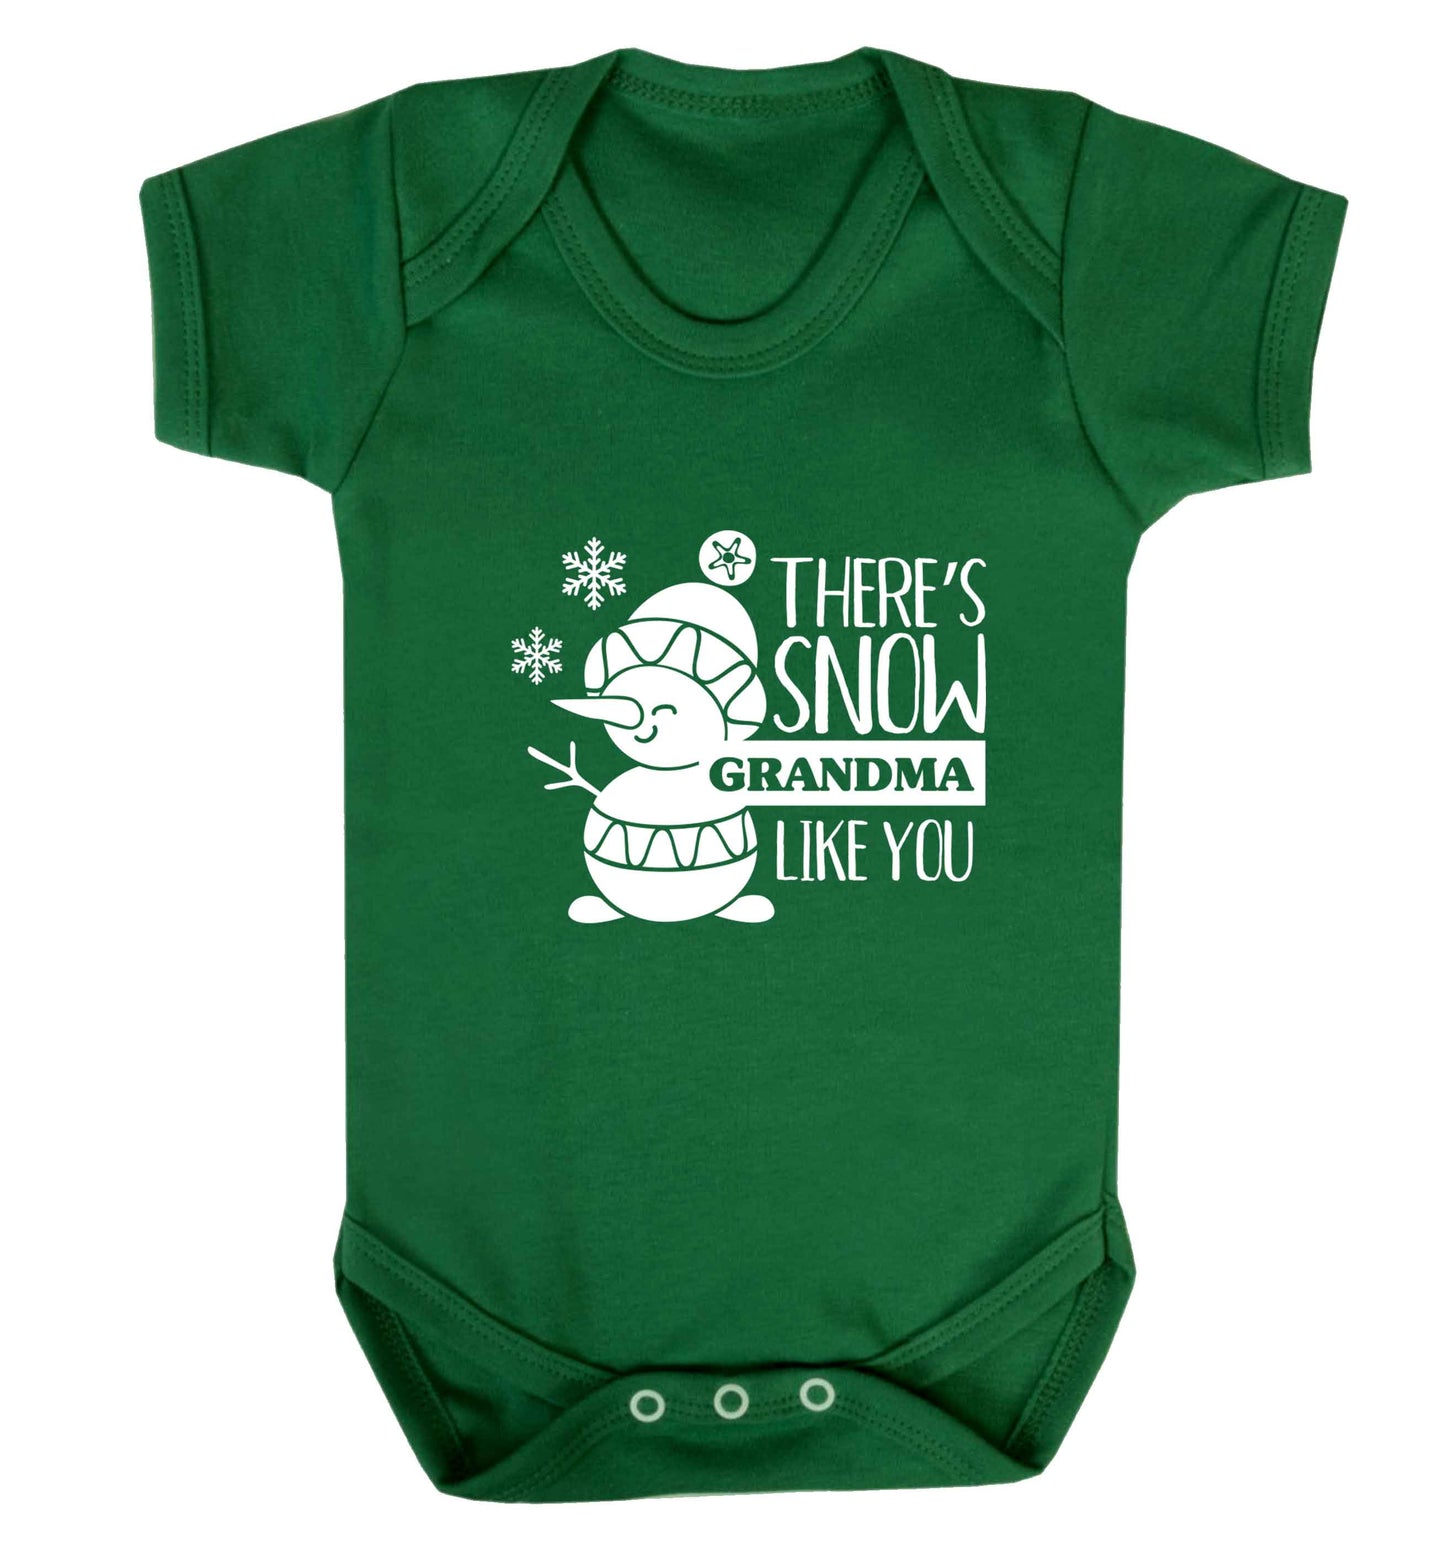 There's snow grandma like you baby vest green 18-24 months